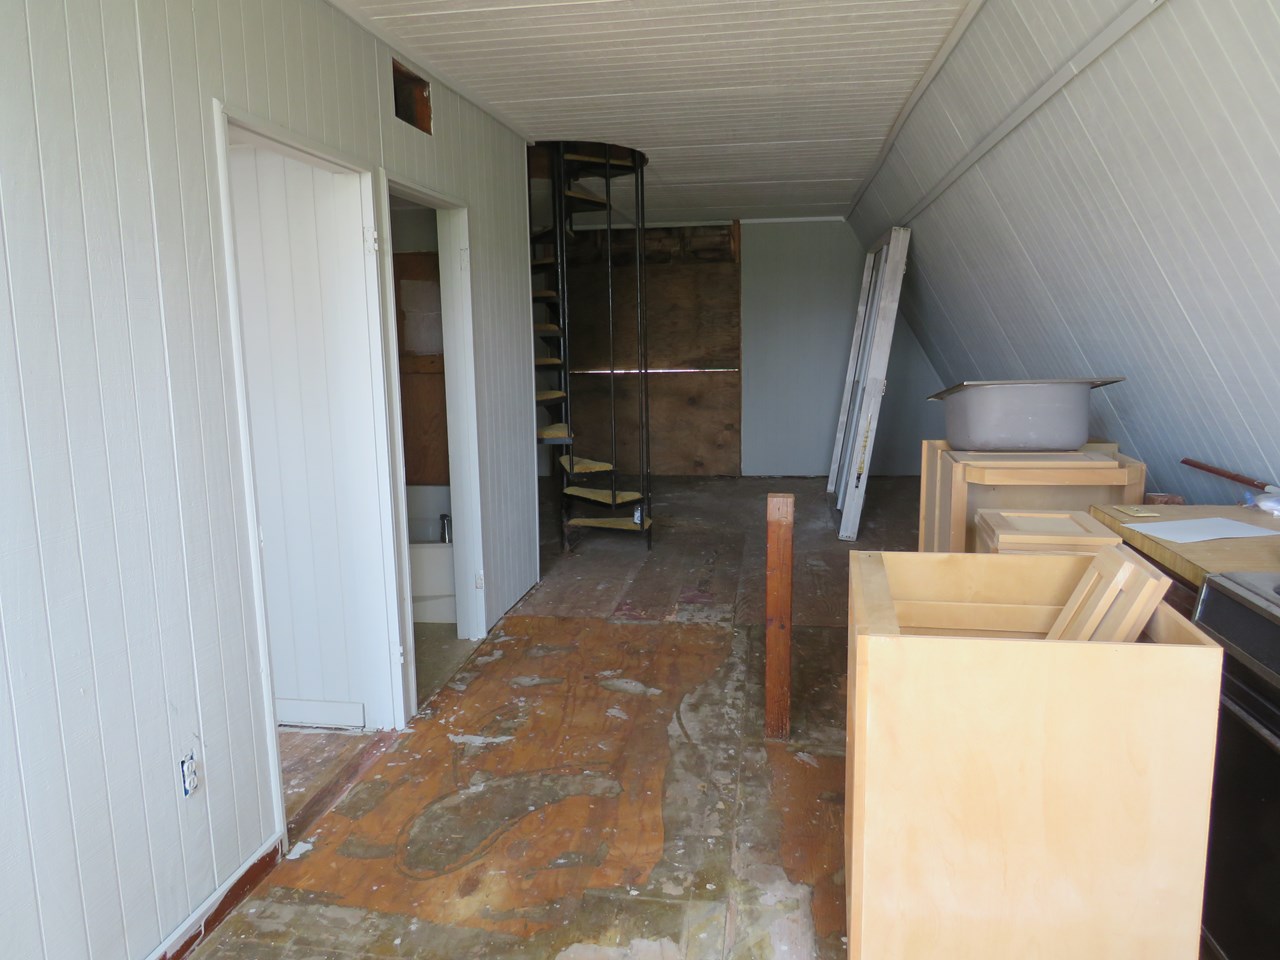 kitchen area -- interior of unfinished cabin